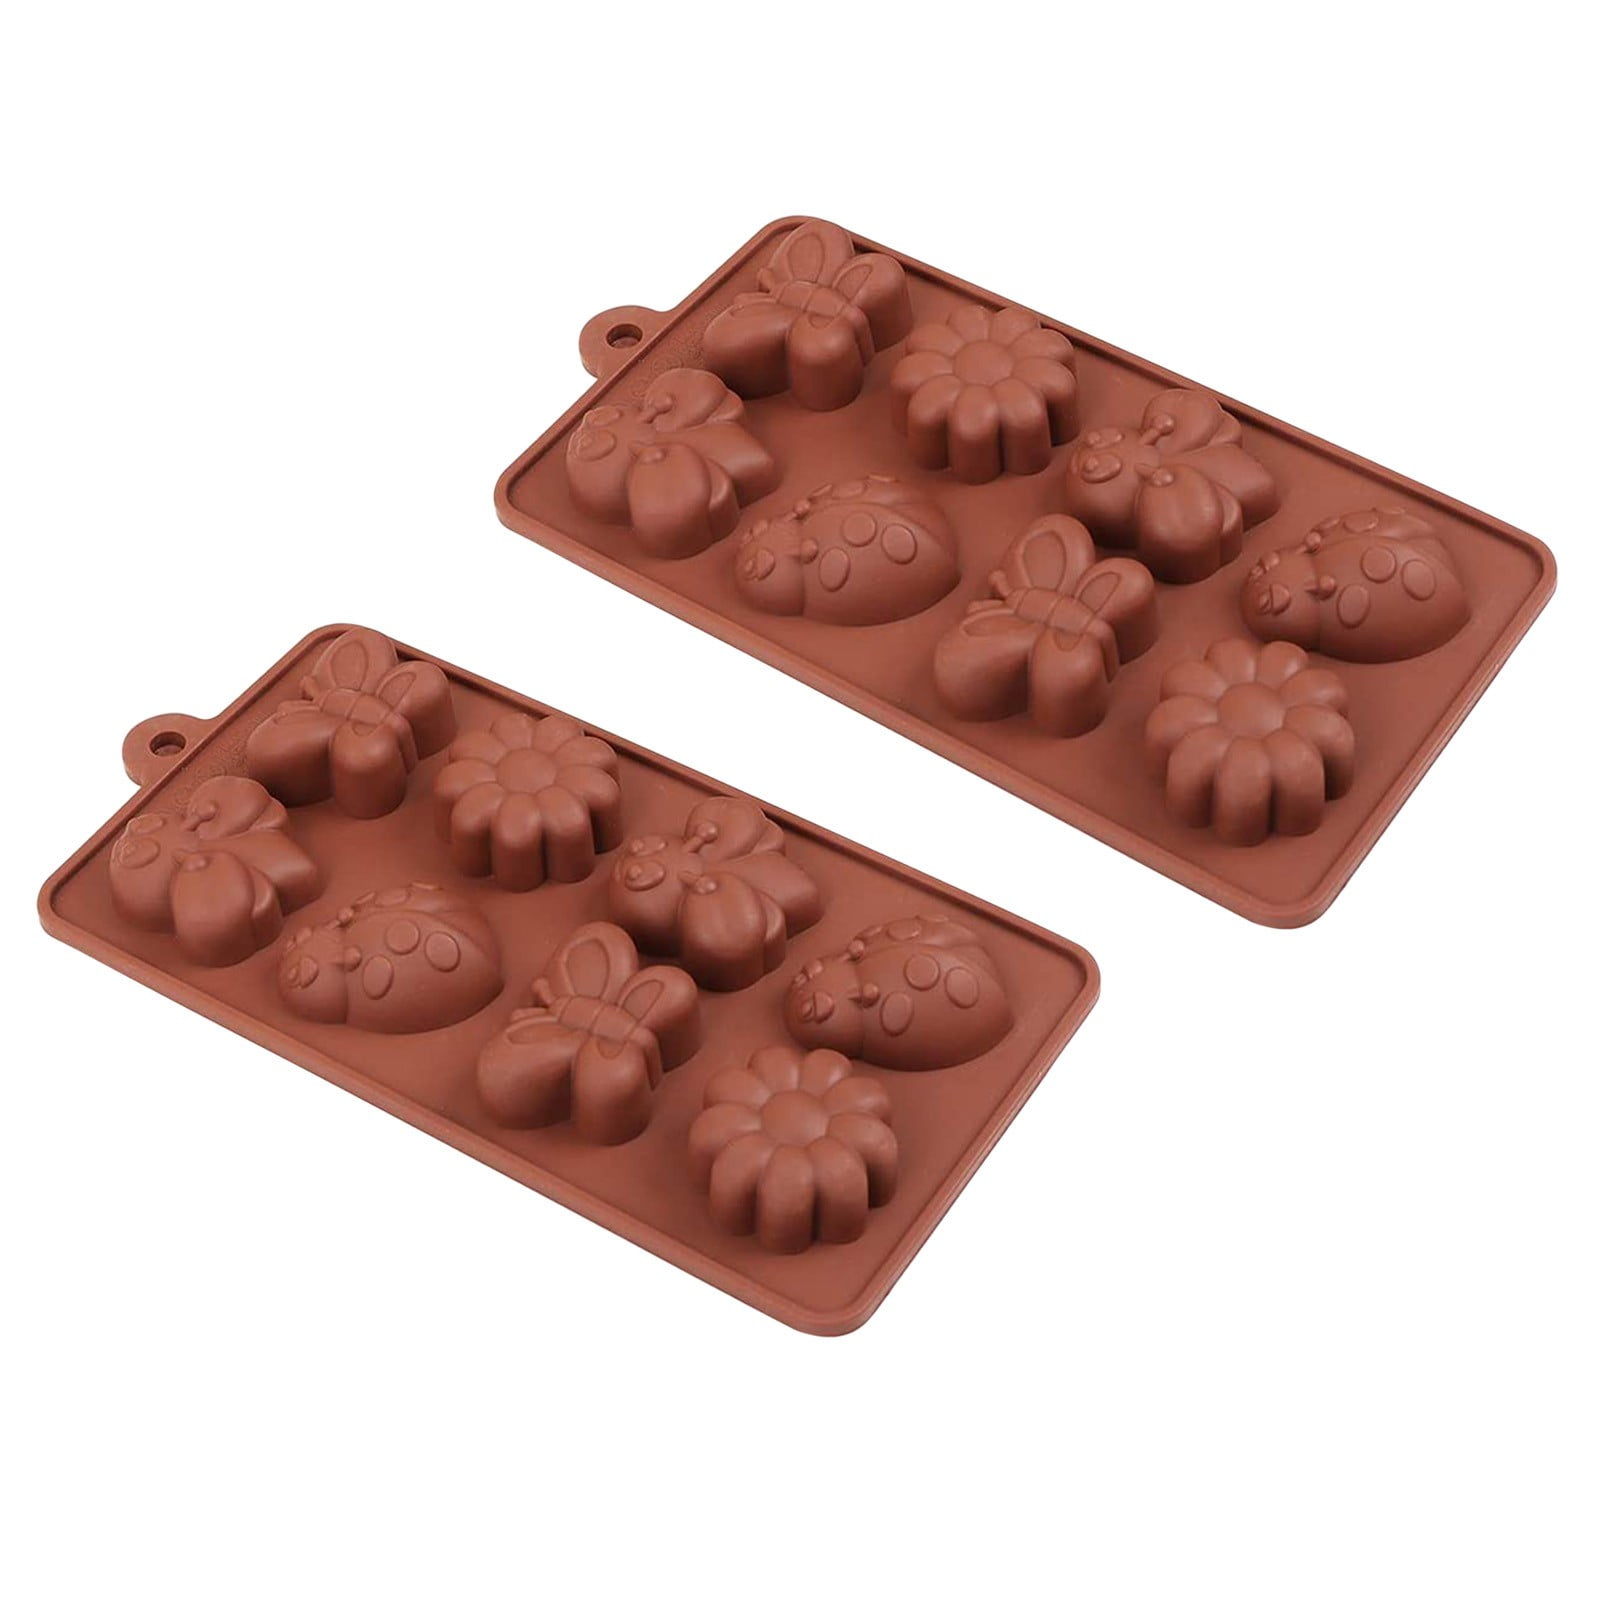 RETRO CAR BEETLE Vehicle Chocolate Silicone Bakeware Cake Lolly Mould Candy Mold